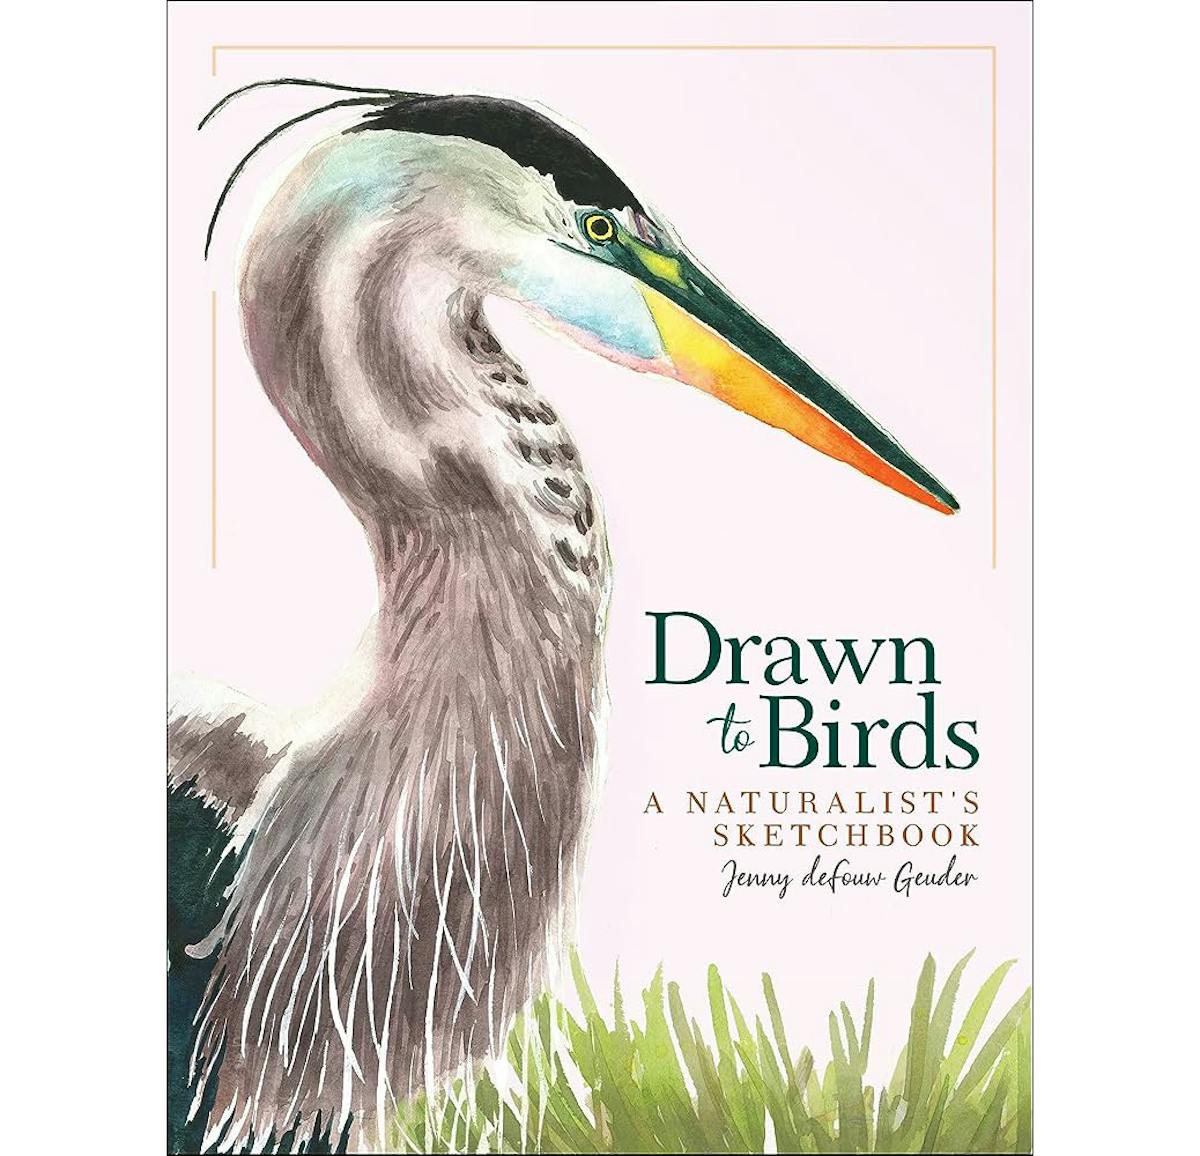 Cover image of “Drawn to Birds, A Naturalist’s Sketchbook,” by Jenny deFouw Geuder, Adventure Publications